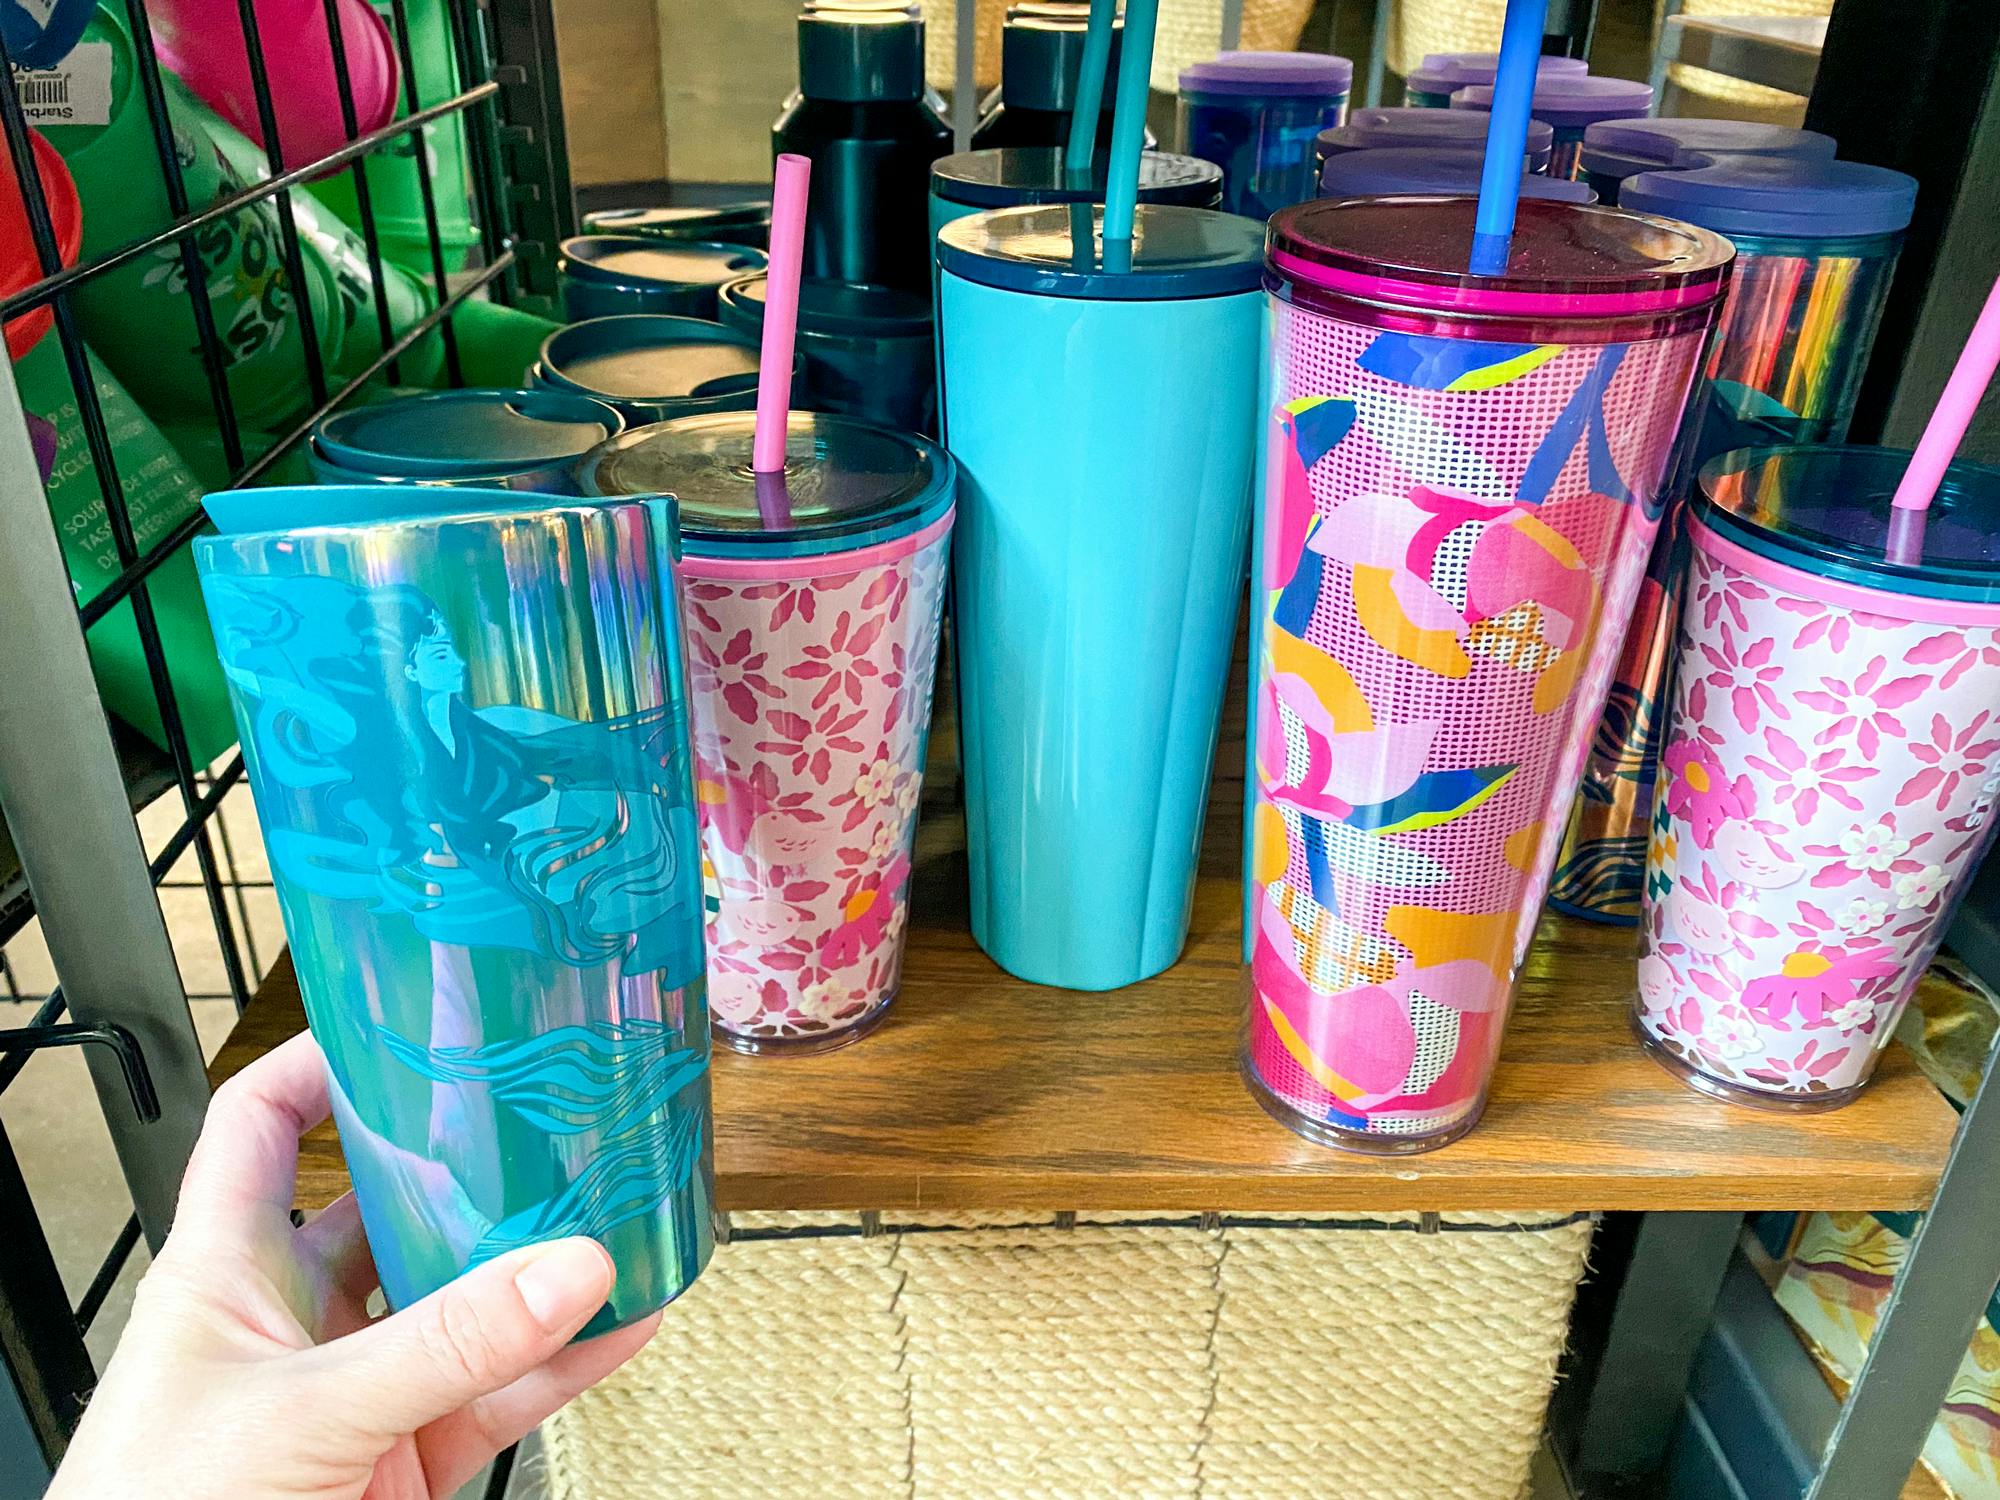 https://prod-cdn-thekrazycouponlady.imgix.net/wp-content/uploads/2023/02/0323-starbucks-spring-cups-hot-mermaid-holographic-1679667611-1679667611.jpg?auto=format&fit=fill